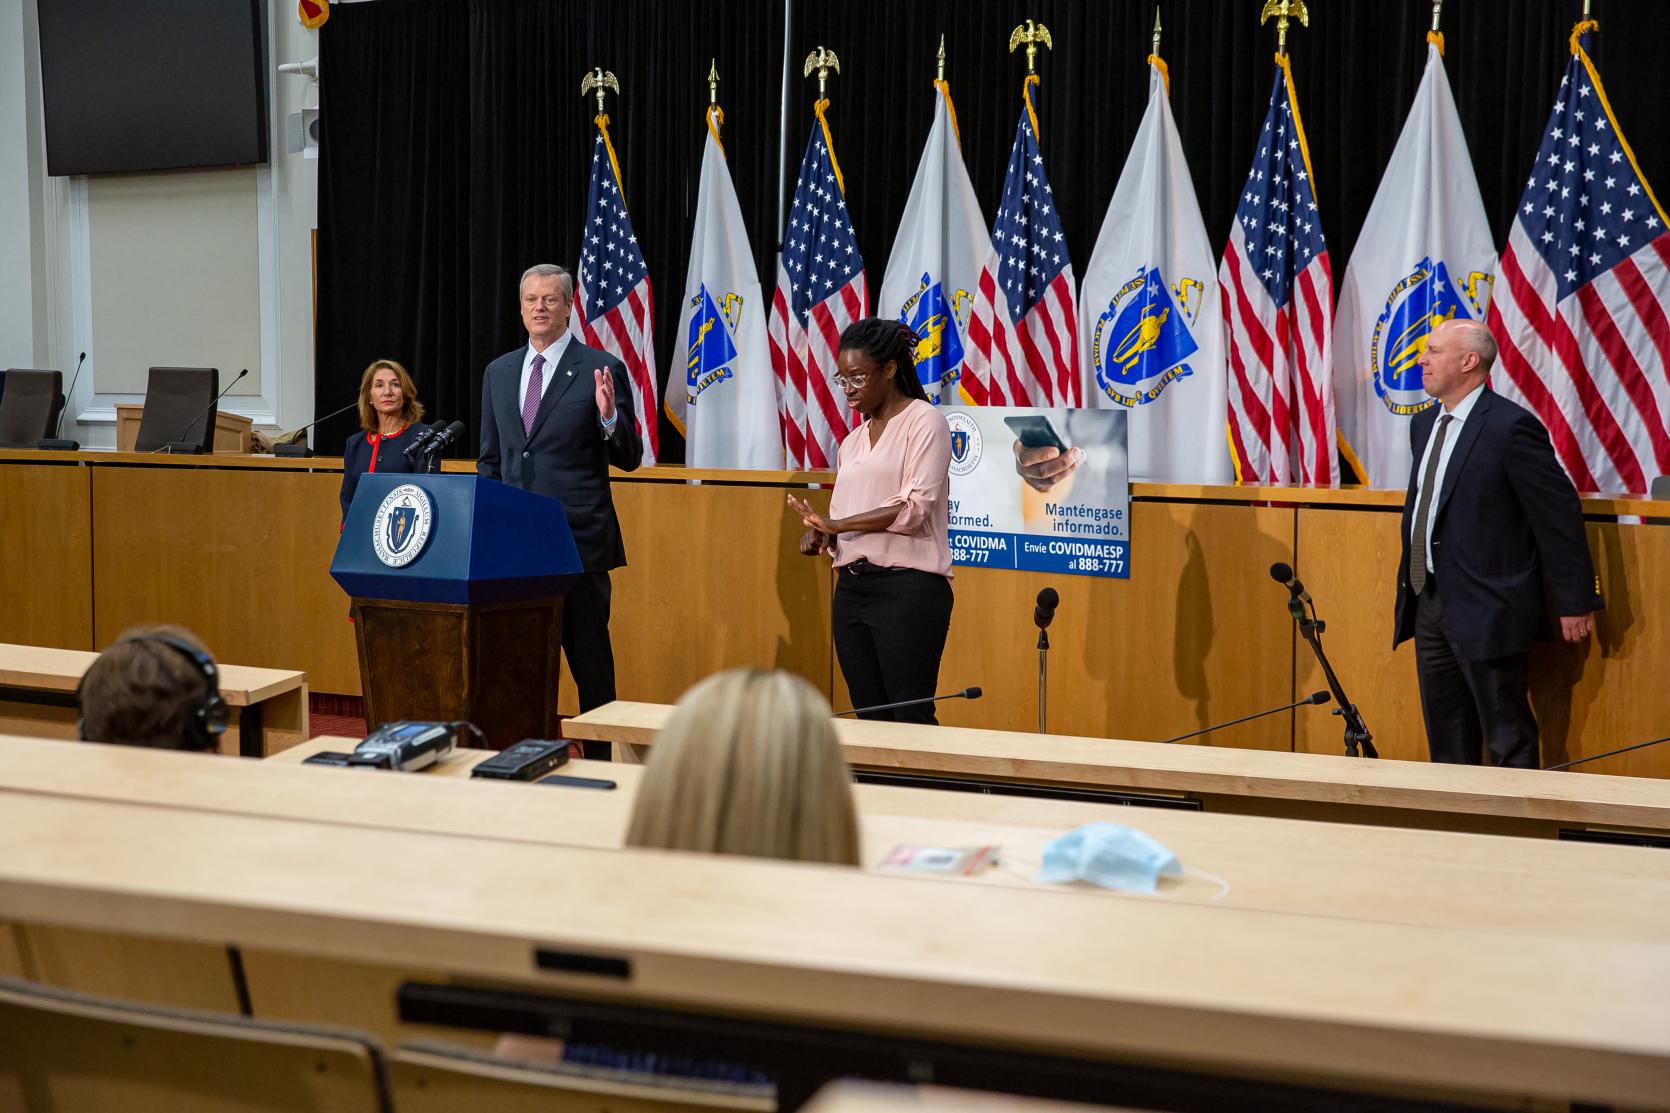 Baker-Polito Administration Unveils $275M COVID-19 Economic Relief Package to Promote Equity and Economic Growth